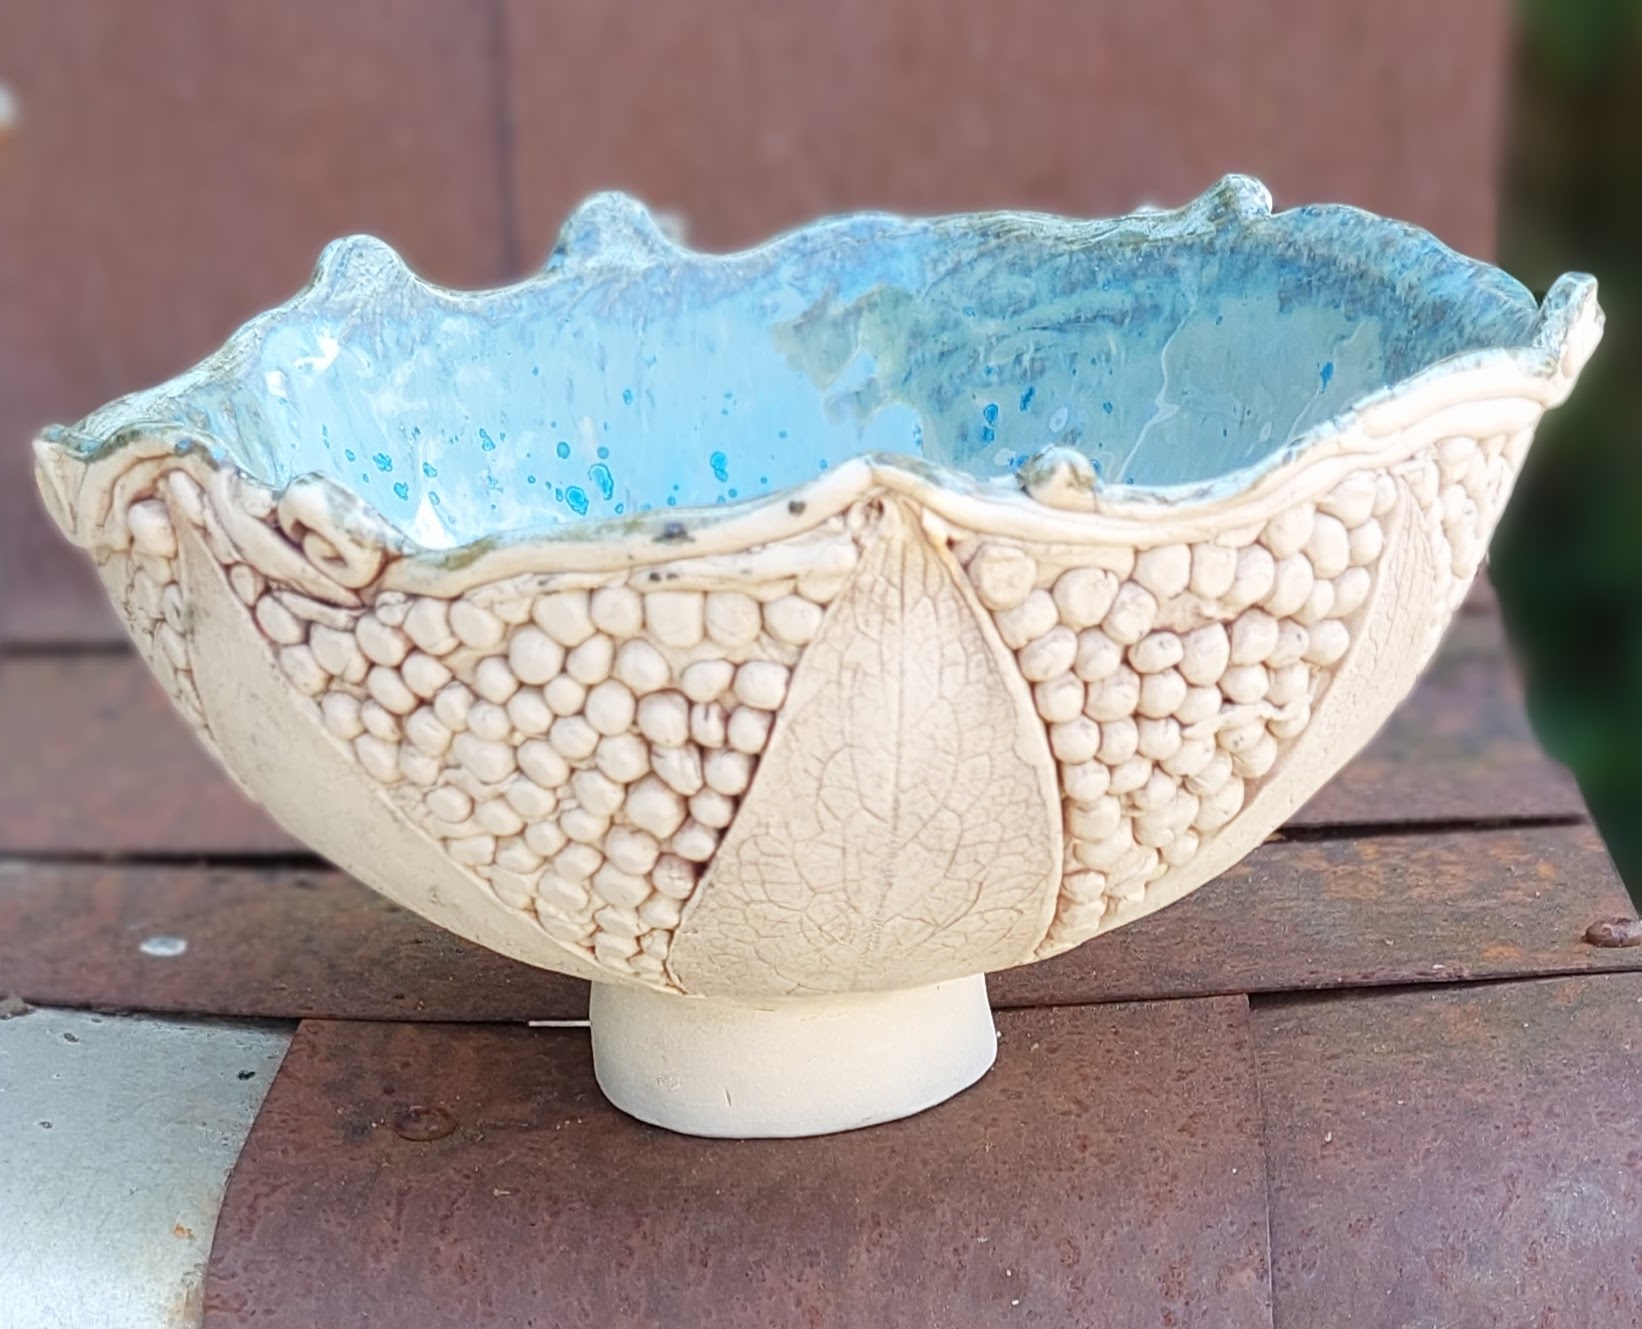 Hand thrown bowl on a stem. Pale blue inside. Coils and leaves outside in natural clay.